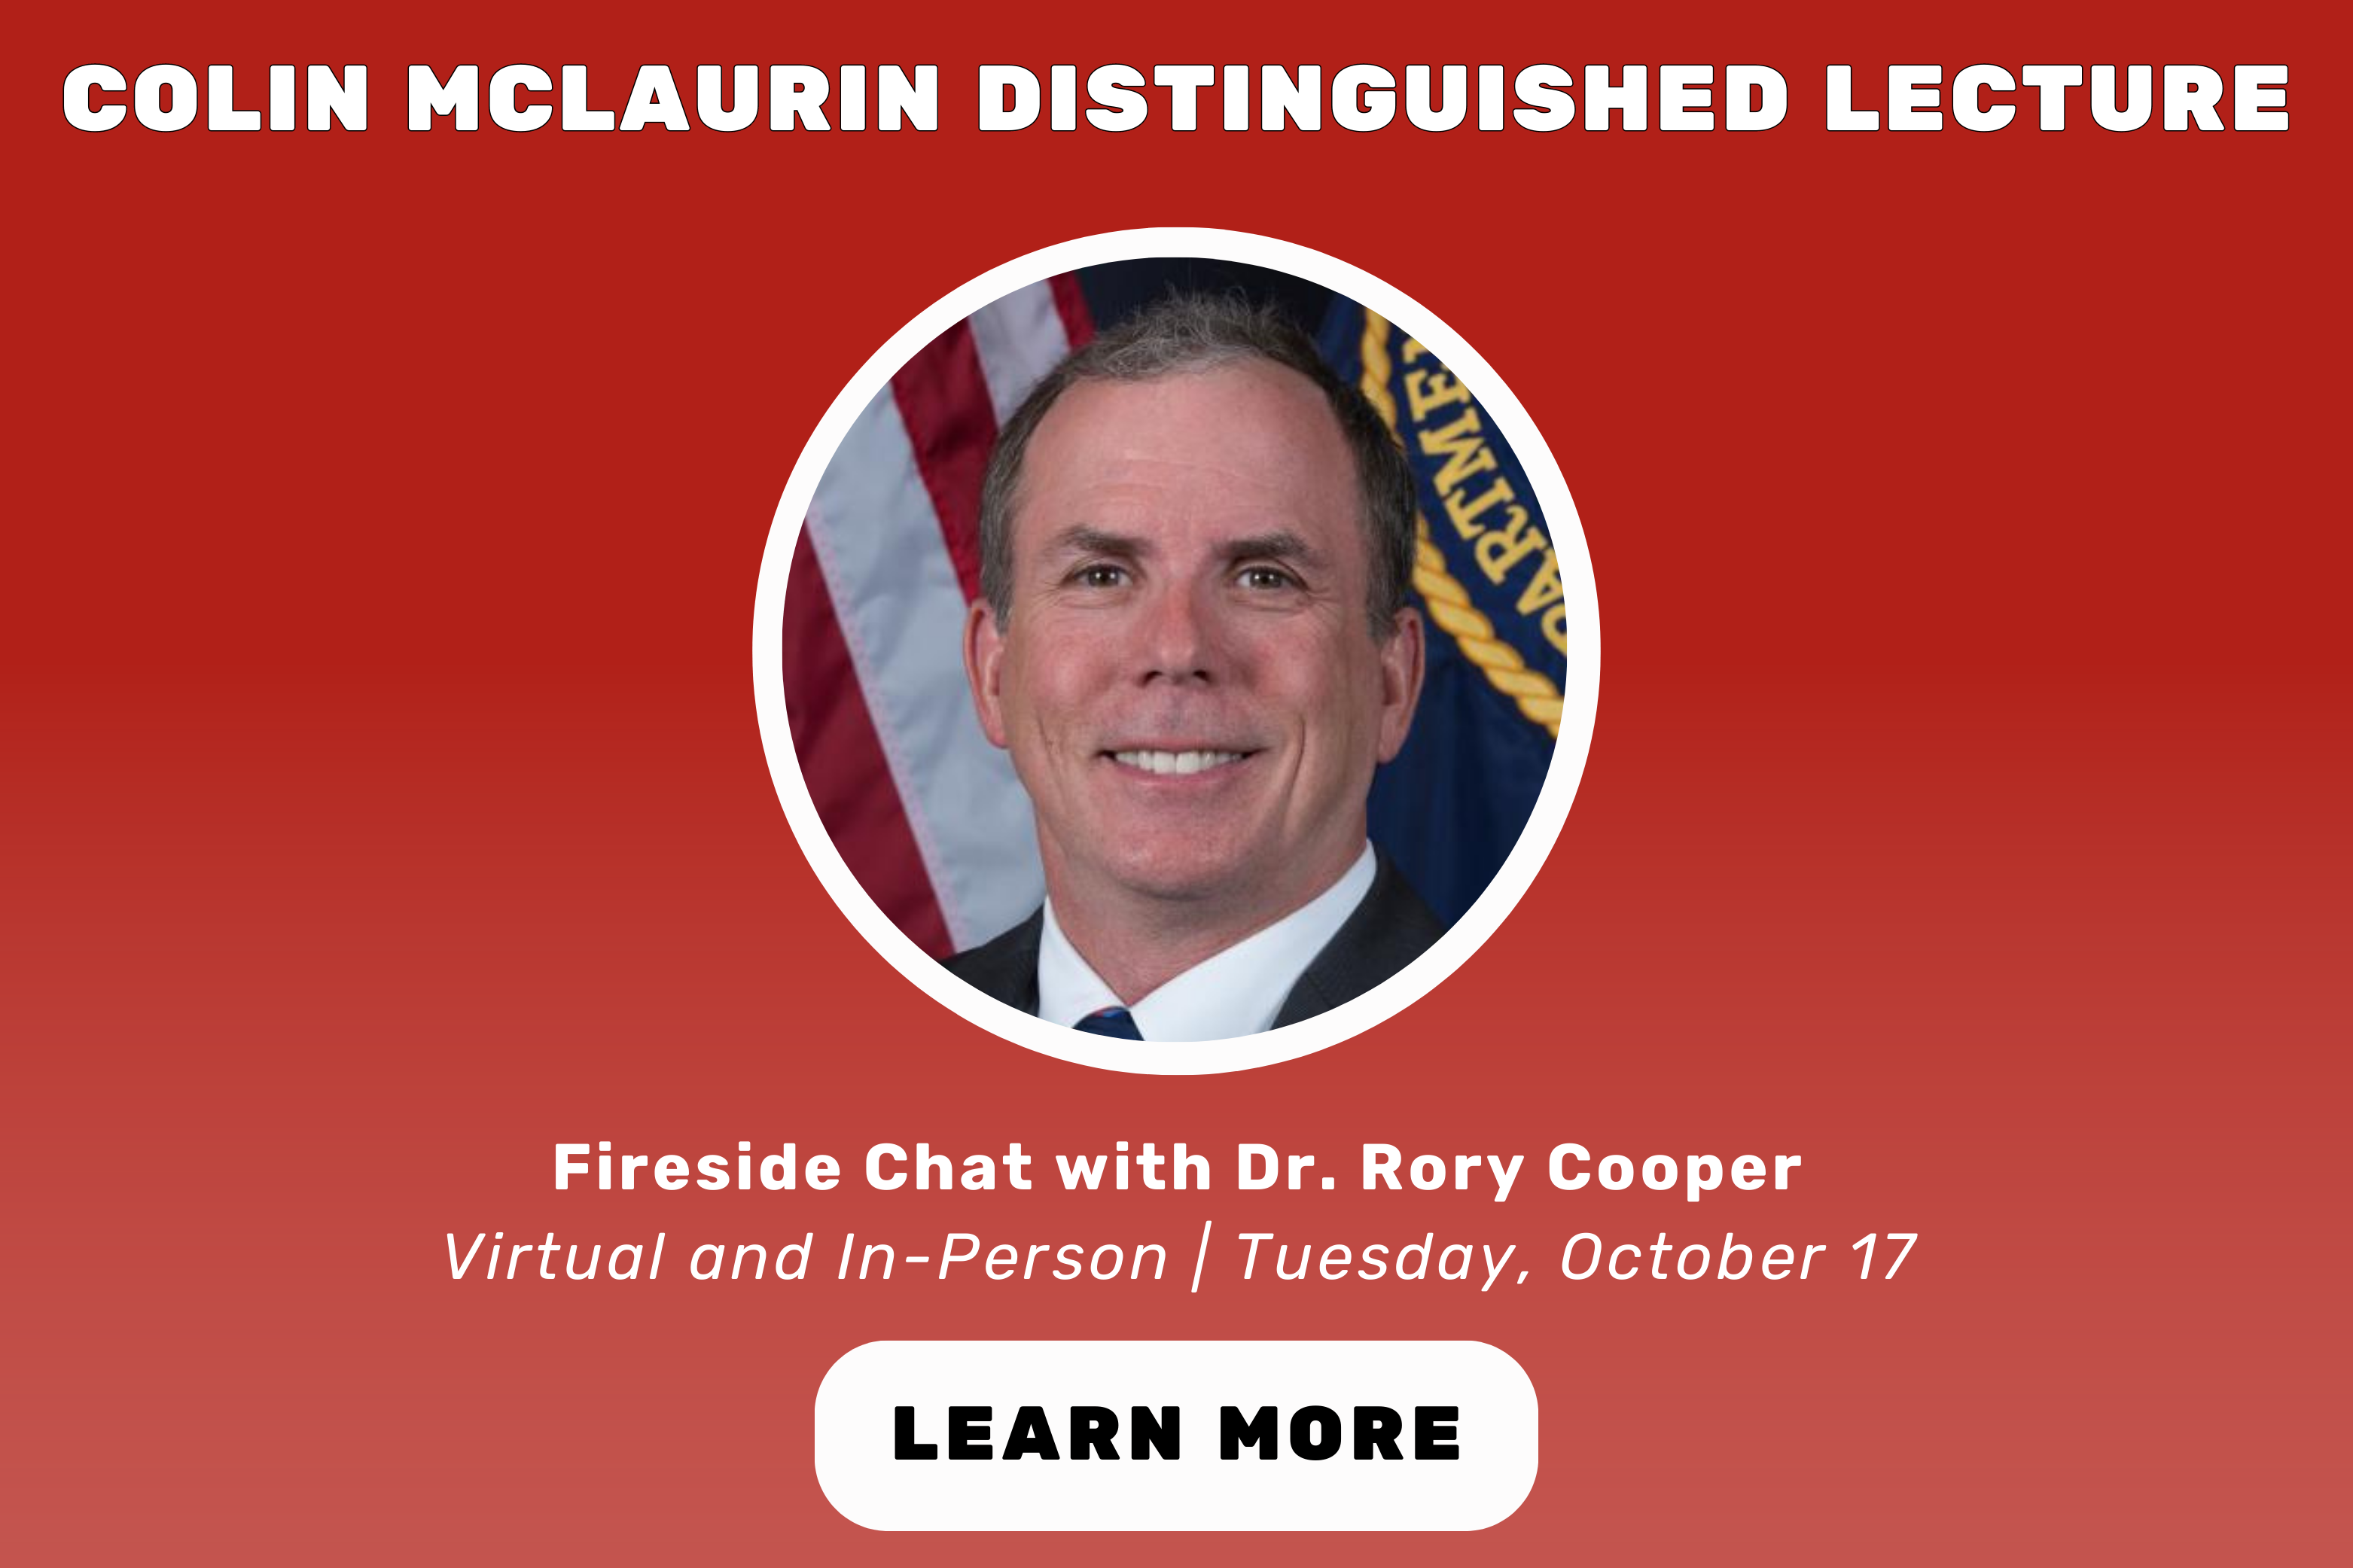 Red banner image for upcoming lecture - it reads "Colin Mclaurin Distinguished Lecture". Then there is a headshot of Colin, and below that it reads "Fireside Chat with Dr. Rory Cooper. Virtual and In-Person | Tuesday, October 17. Learn More."